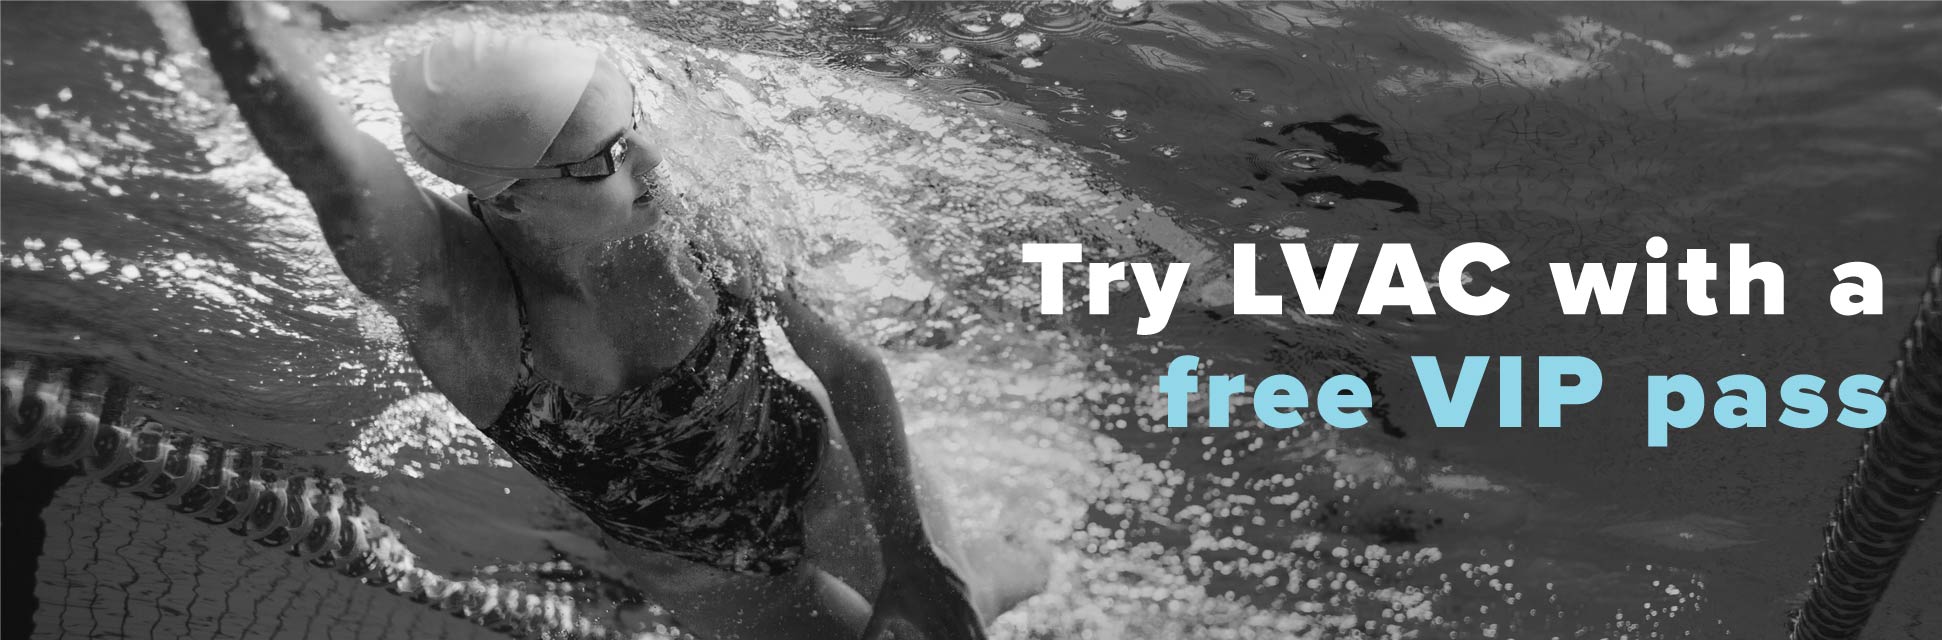 Try LVAC with a free VIP pass